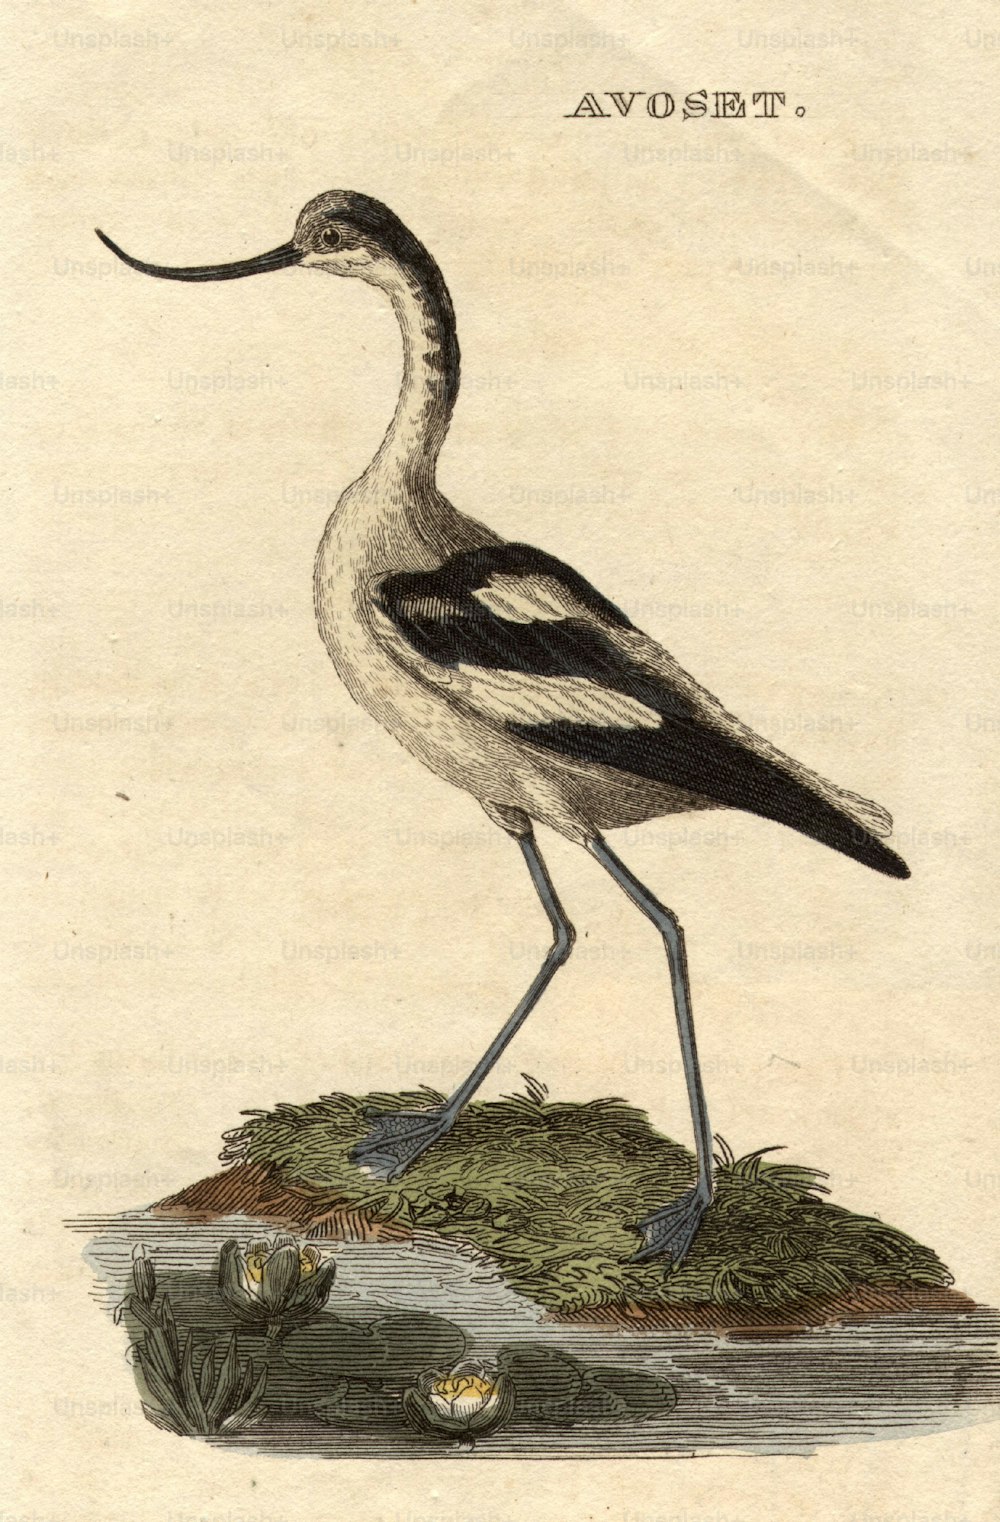 circa 1800:  The Avoset, a wading bird with a curved bill.  (Photo by Hulton Archive/Getty Images)